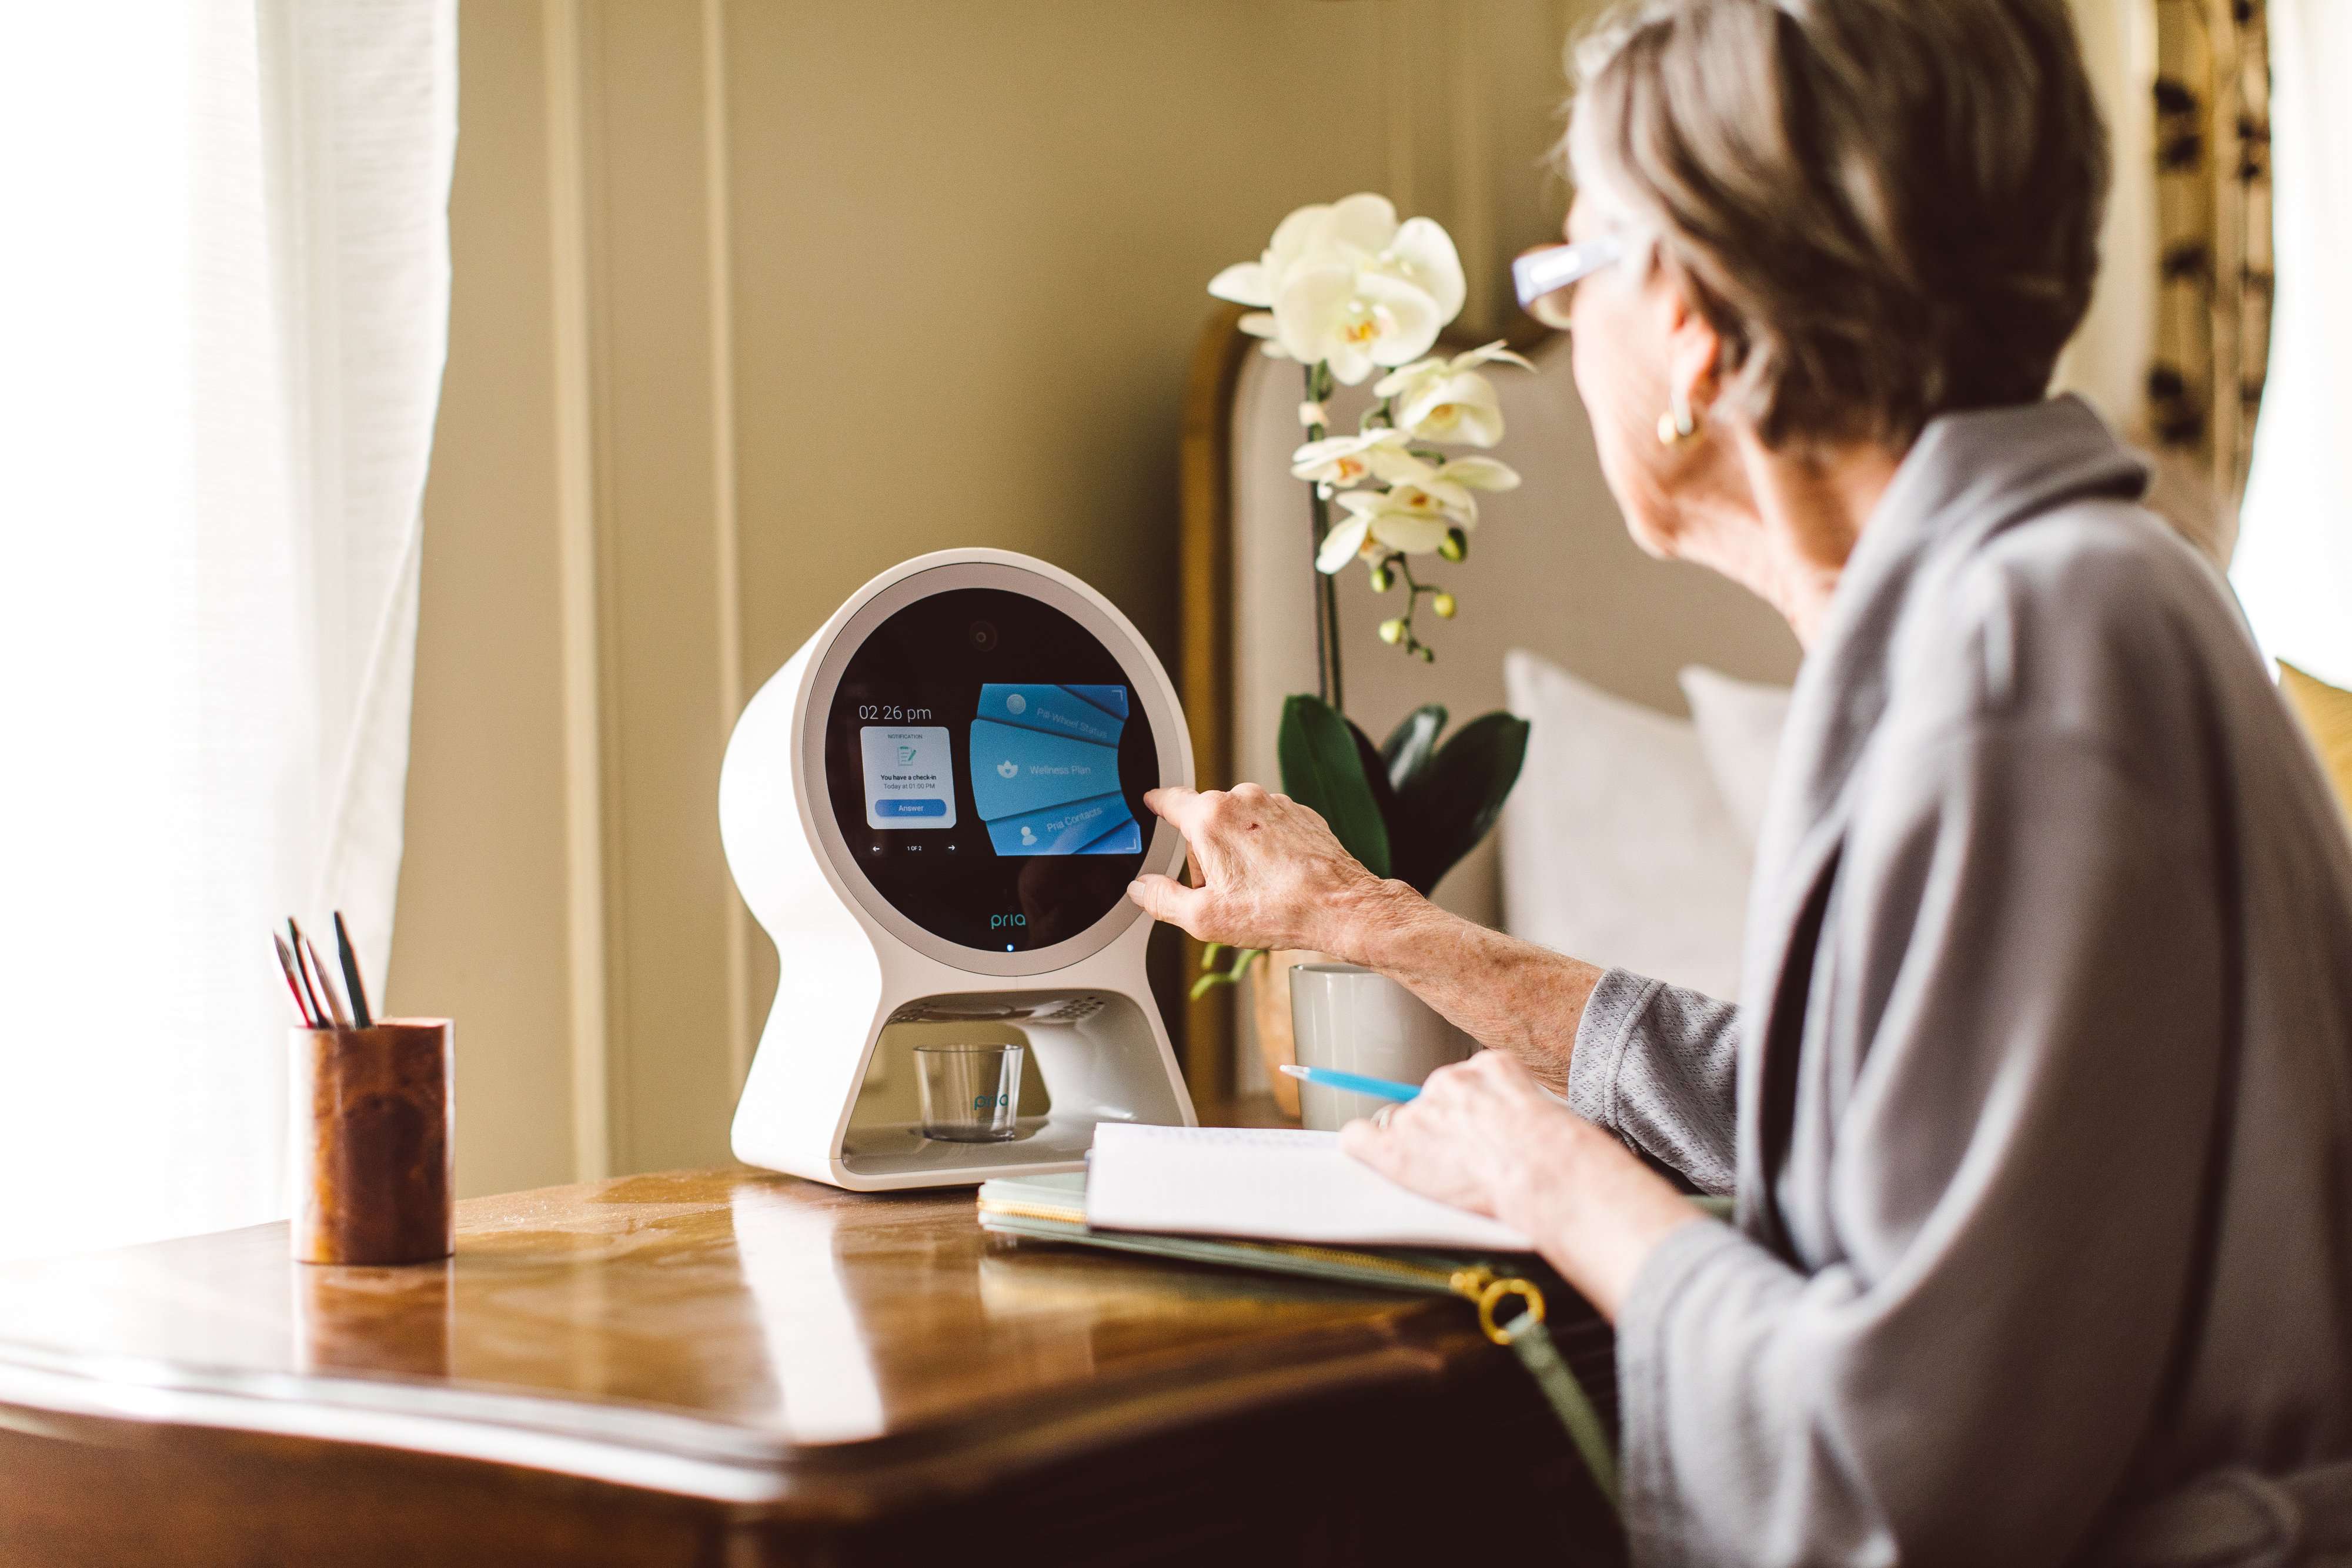 New robot from Pillo Health, Black+Decker offers in-home monitoring, medication dispensing